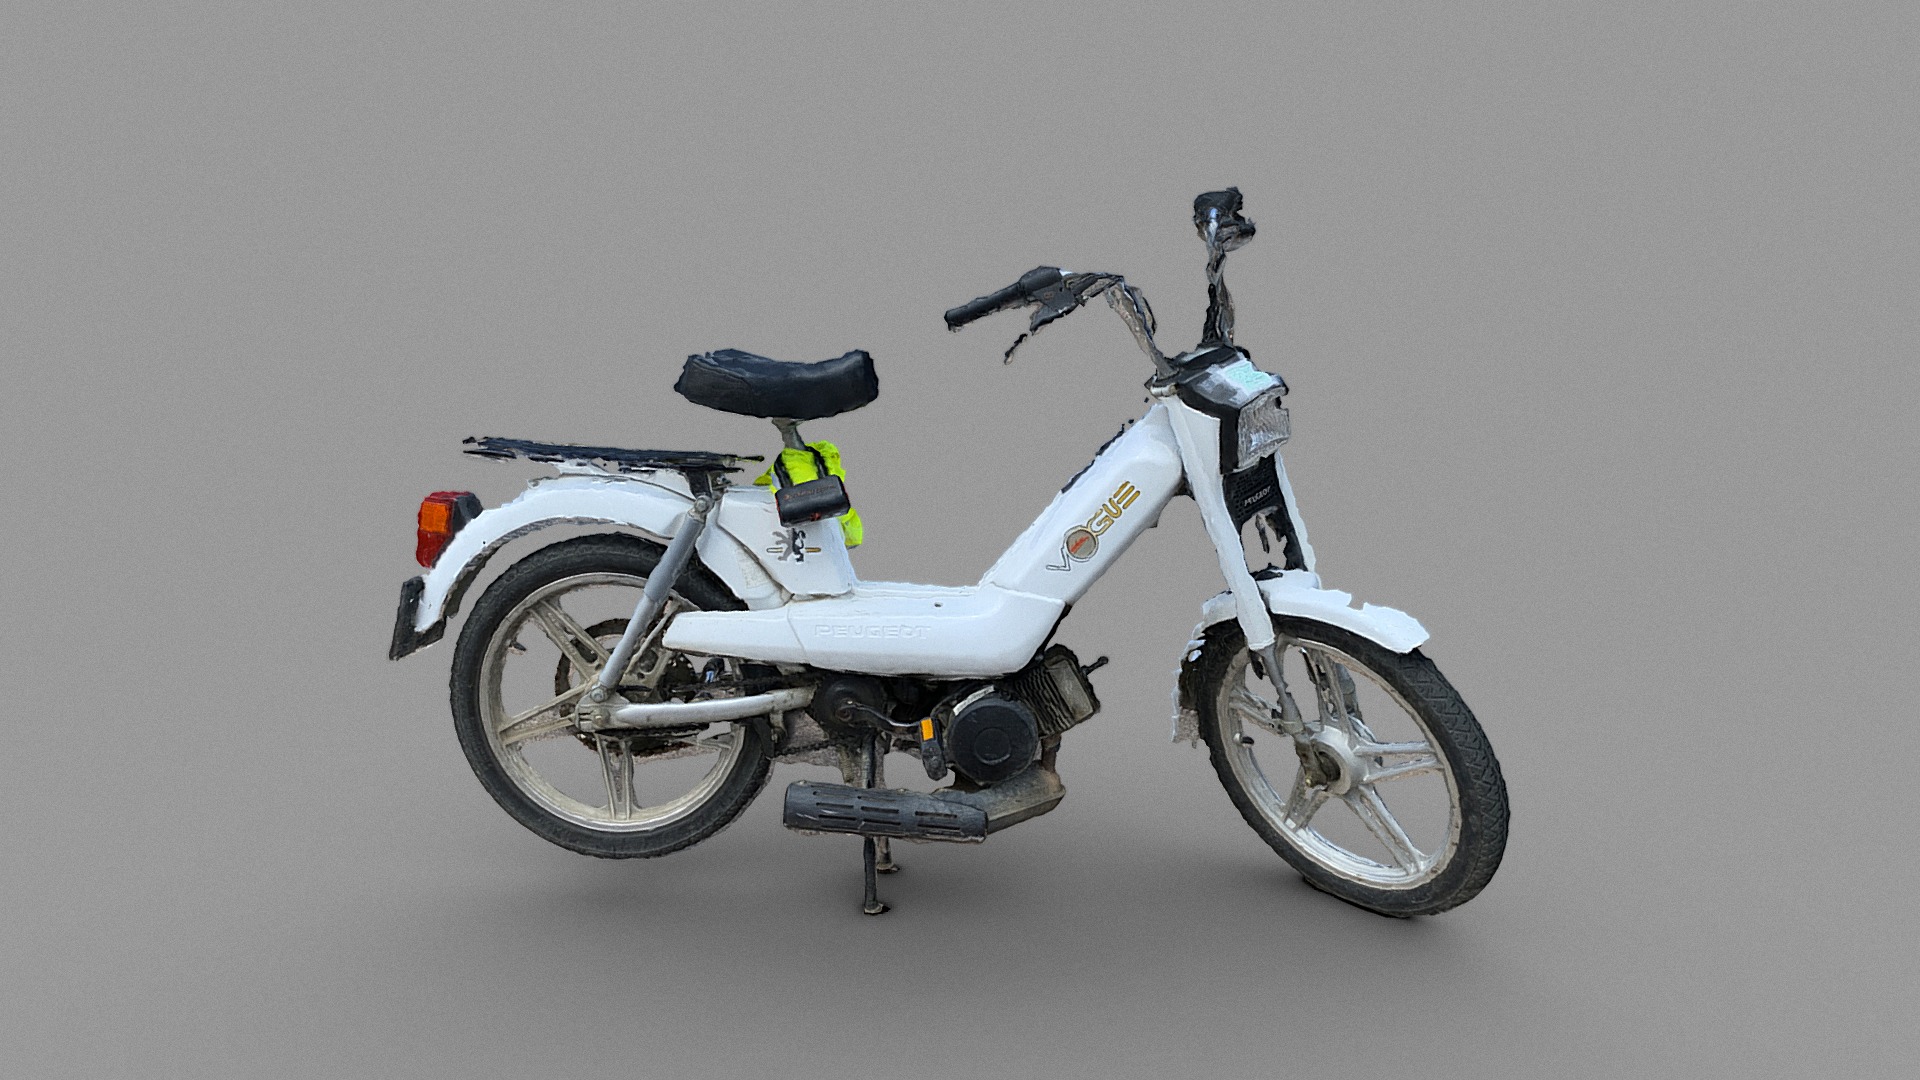 3D model Peugeot 103 Vogue scooter - This is a 3D model of the Peugeot 103 Vogue scooter. The 3D model is about a white and black motorcycle.